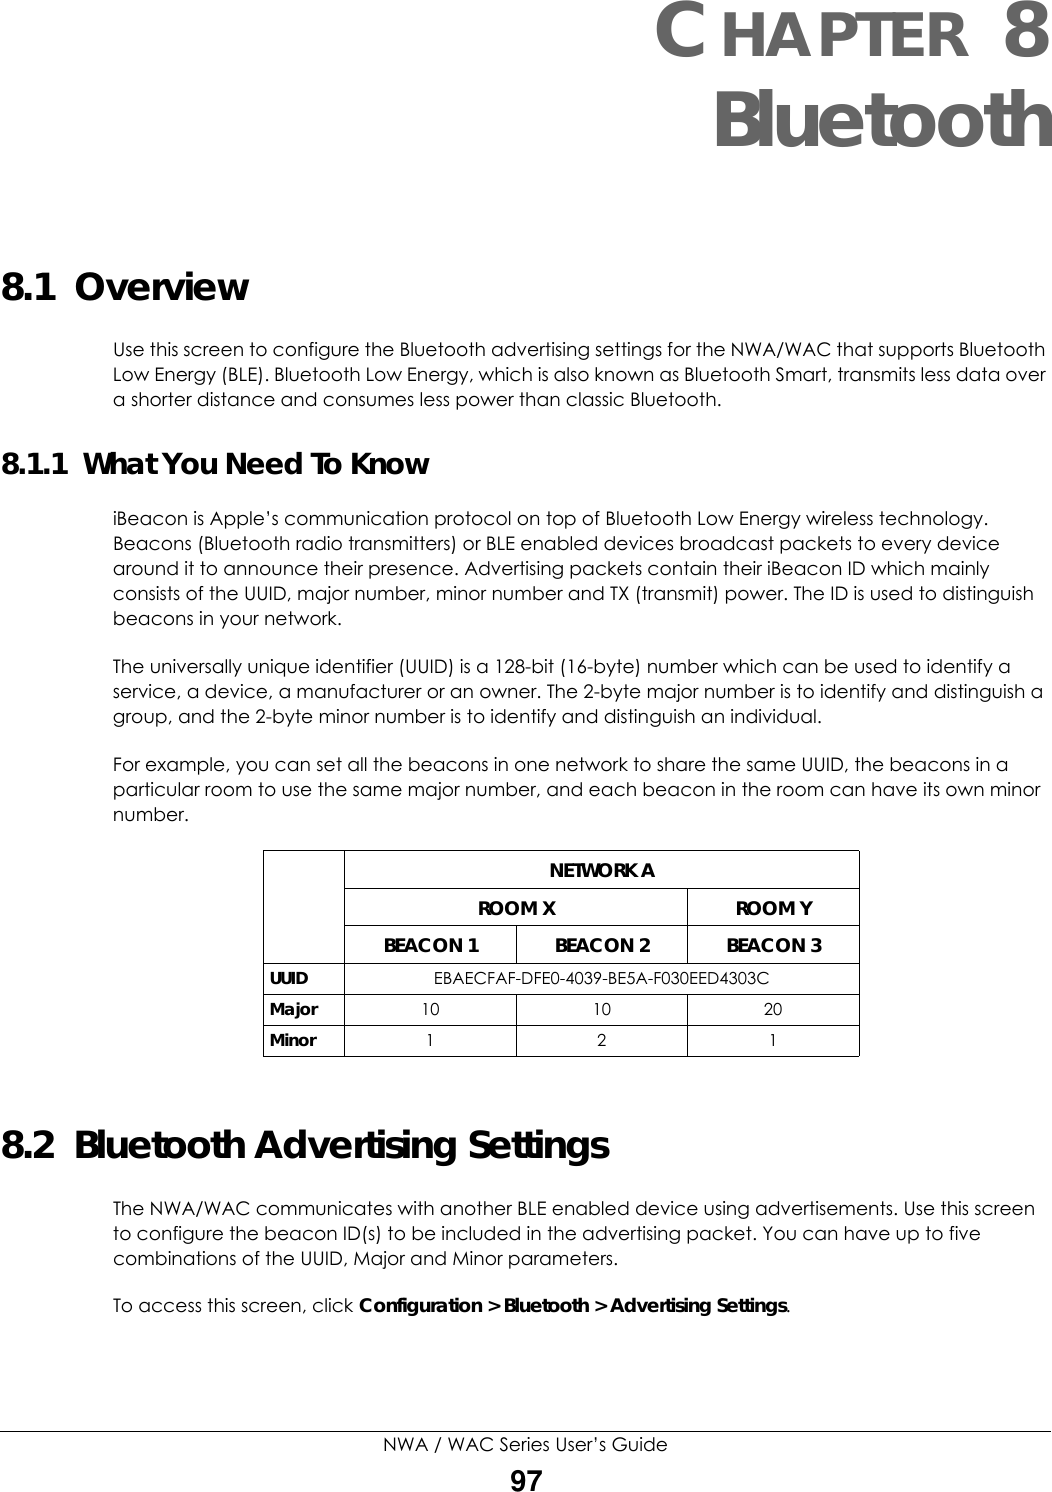 NWA / WAC Series User’s Guide97CHAPTER 8Bluetooth8.1  OverviewUse this screen to configure the Bluetooth advertising settings for the NWA/WAC that supports Bluetooth Low Energy (BLE). Bluetooth Low Energy, which is also known as Bluetooth Smart, transmits less data over a shorter distance and consumes less power than classic Bluetooth.8.1.1  What You Need To KnowiBeacon is Apple’s communication protocol on top of Bluetooth Low Energy wireless technology. Beacons (Bluetooth radio transmitters) or BLE enabled devices broadcast packets to every device around it to announce their presence. Advertising packets contain their iBeacon ID which mainly consists of the UUID, major number, minor number and TX (transmit) power. The ID is used to distinguish beacons in your network.The universally unique identifier (UUID) is a 128-bit (16-byte) number which can be used to identify a service, a device, a manufacturer or an owner. The 2-byte major number is to identify and distinguish a group, and the 2-byte minor number is to identify and distinguish an individual. For example, you can set all the beacons in one network to share the same UUID, the beacons in a particular room to use the same major number, and each beacon in the room can have its own minor number. 8.2  Bluetooth Advertising SettingsThe NWA/WAC communicates with another BLE enabled device using advertisements. Use this screen to configure the beacon ID(s) to be included in the advertising packet. You can have up to five combinations of the UUID, Major and Minor parameters.To access this screen, click Configuration &gt; Bluetooth &gt; Advertising Settings.NETWORK AROOM X ROOM YBEACON 1 BEACON 2 BEACON 3UUID EBAECFAF-DFE0-4039-BE5A-F030EED4303CMajor 10 10 20Minor 121